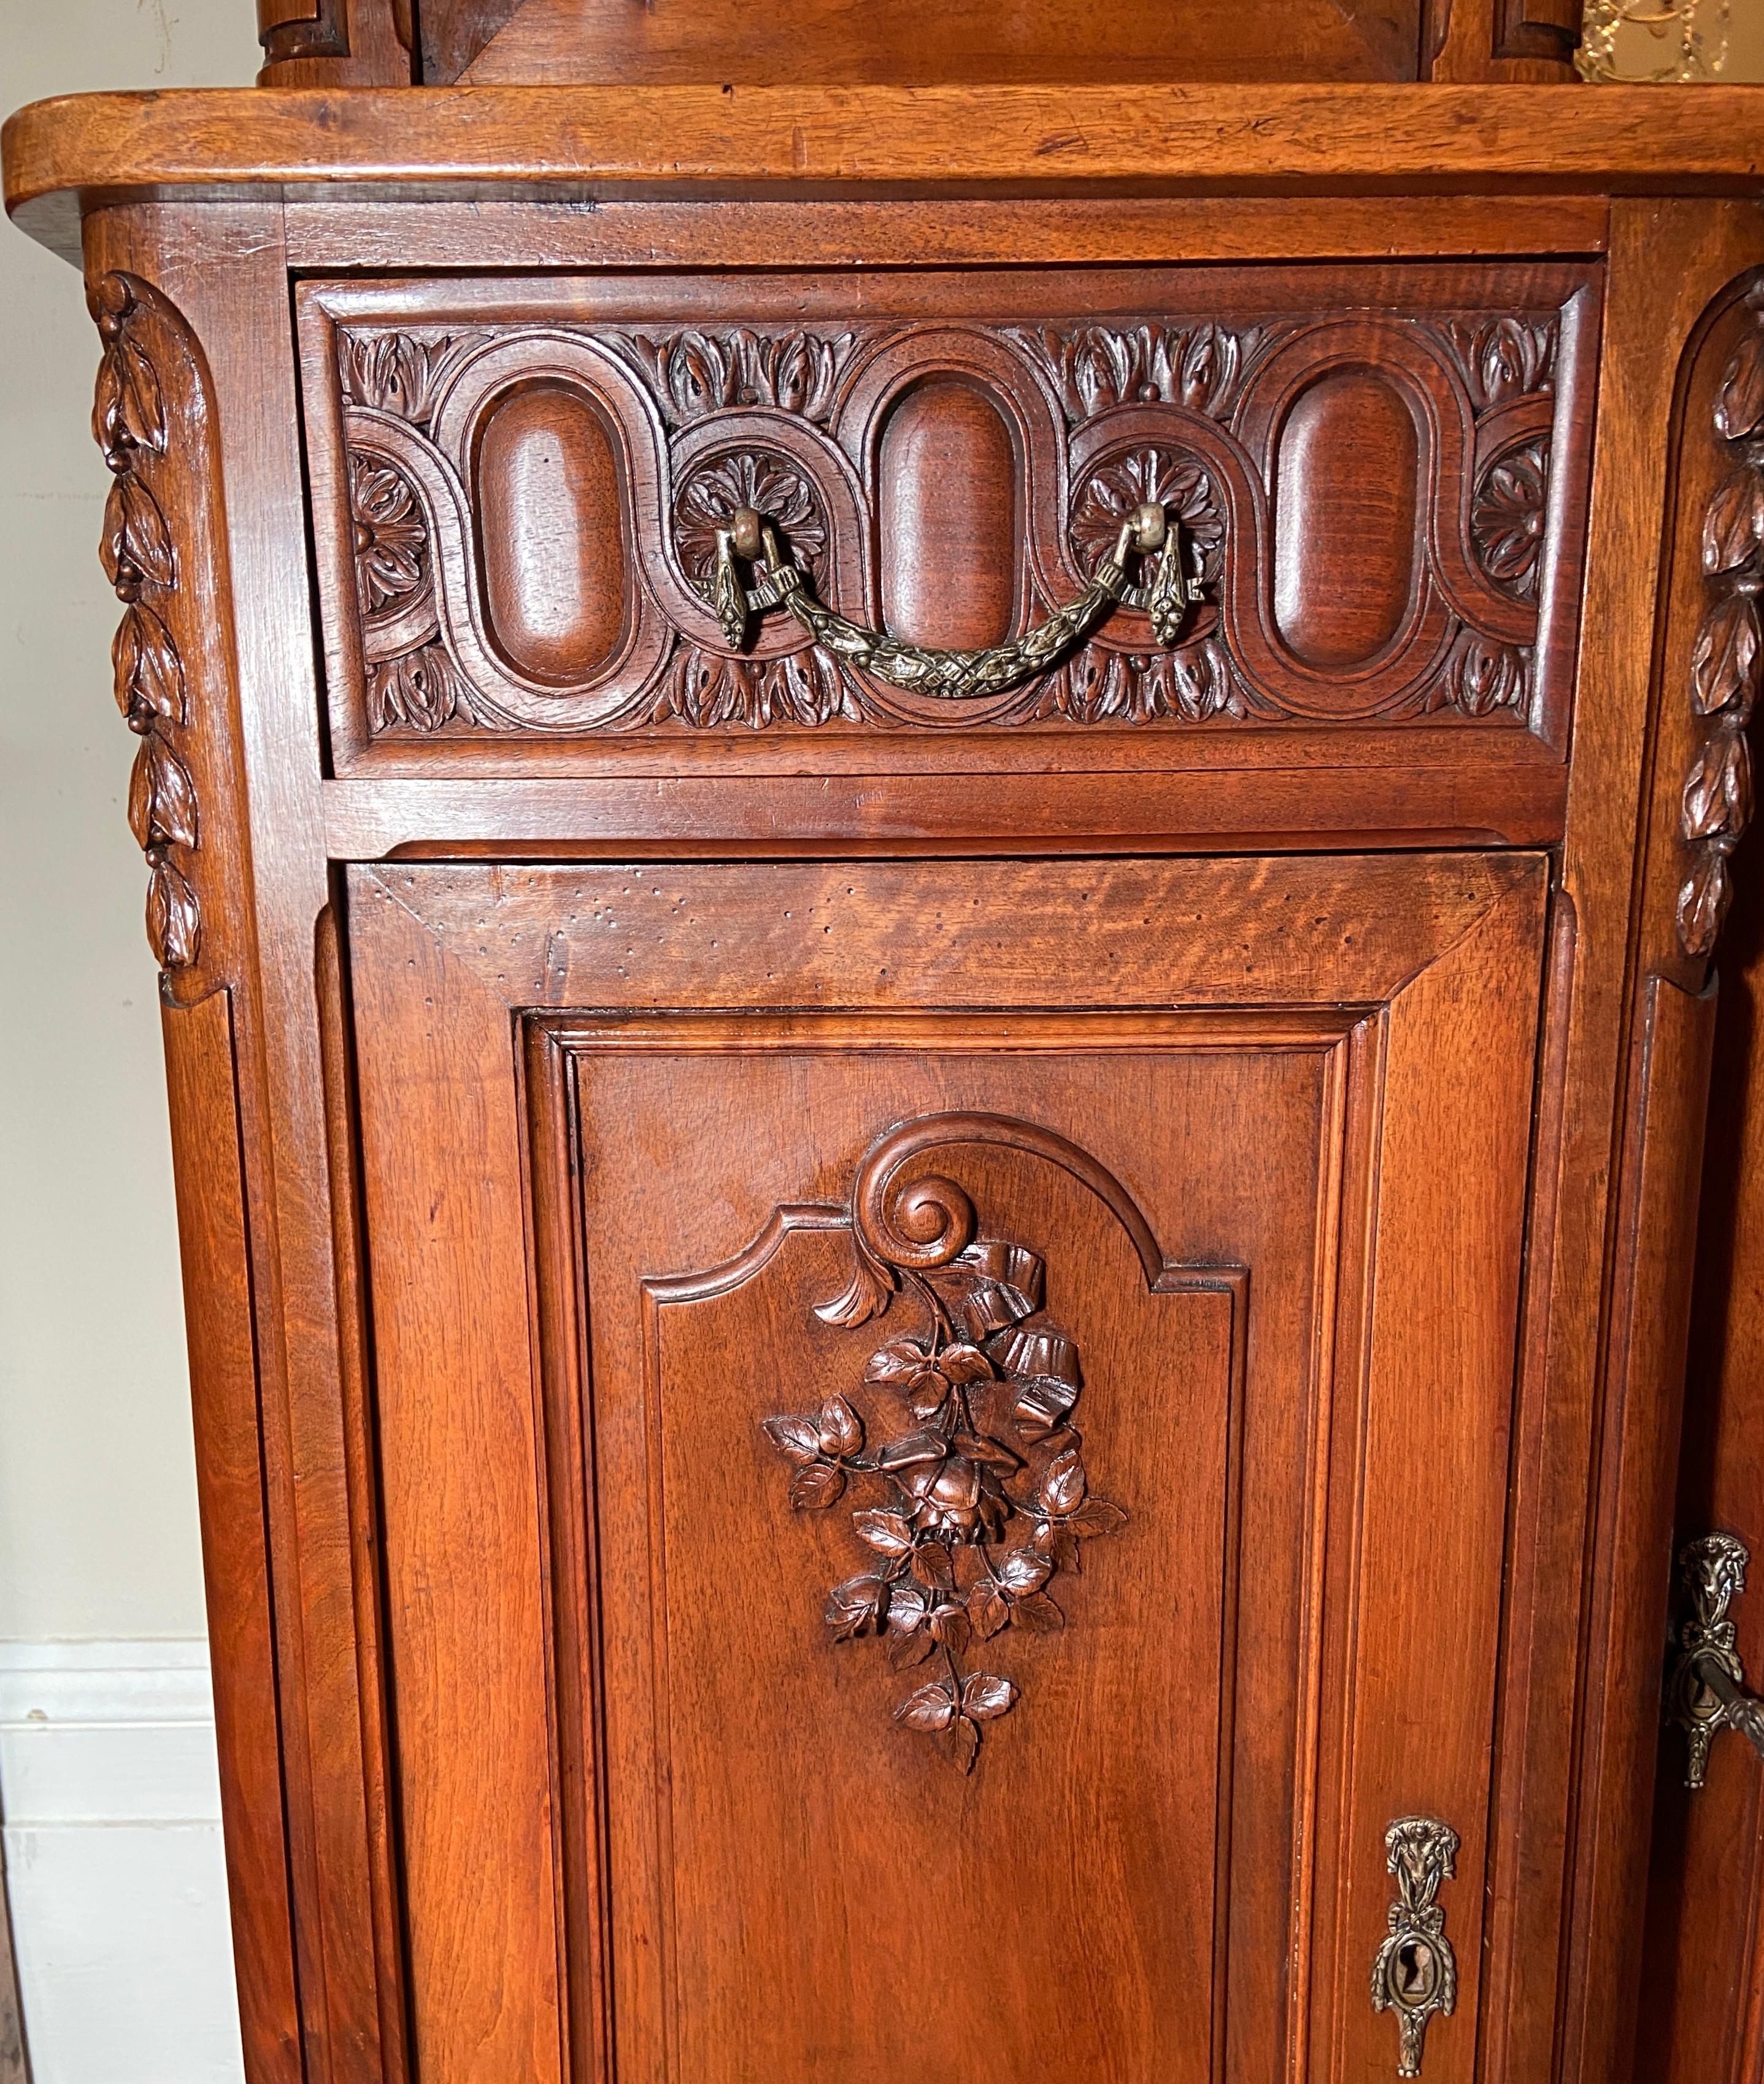 European Antique French Carved Walnut, Beveled Glass and Mirror Cabinet, circa 1875-1895 For Sale